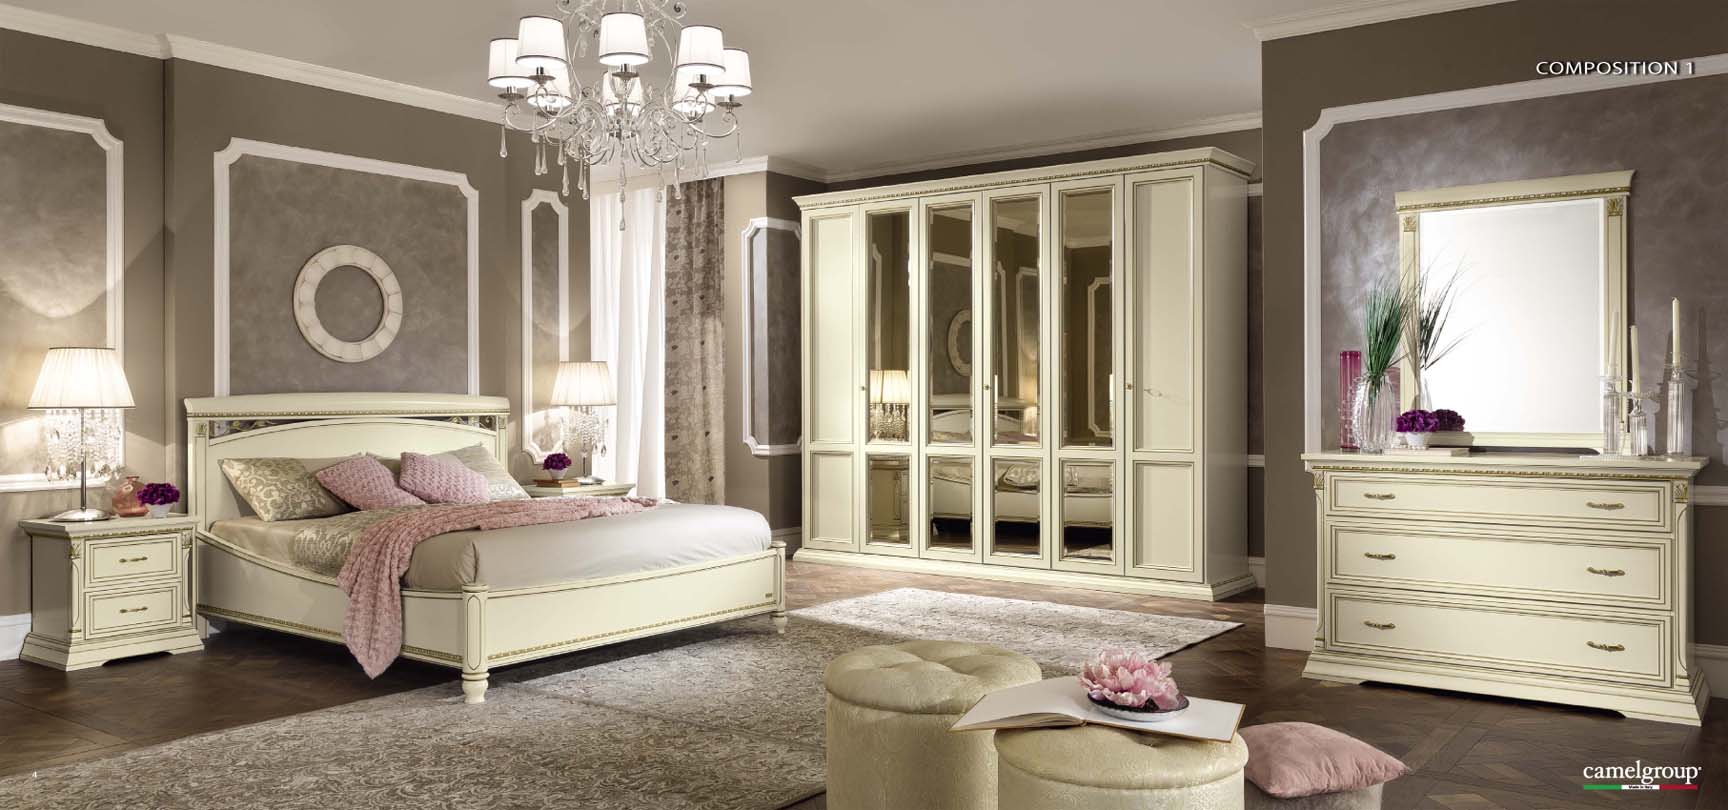 Clearance Bedroom Treviso Night Composition 1 in White Ash